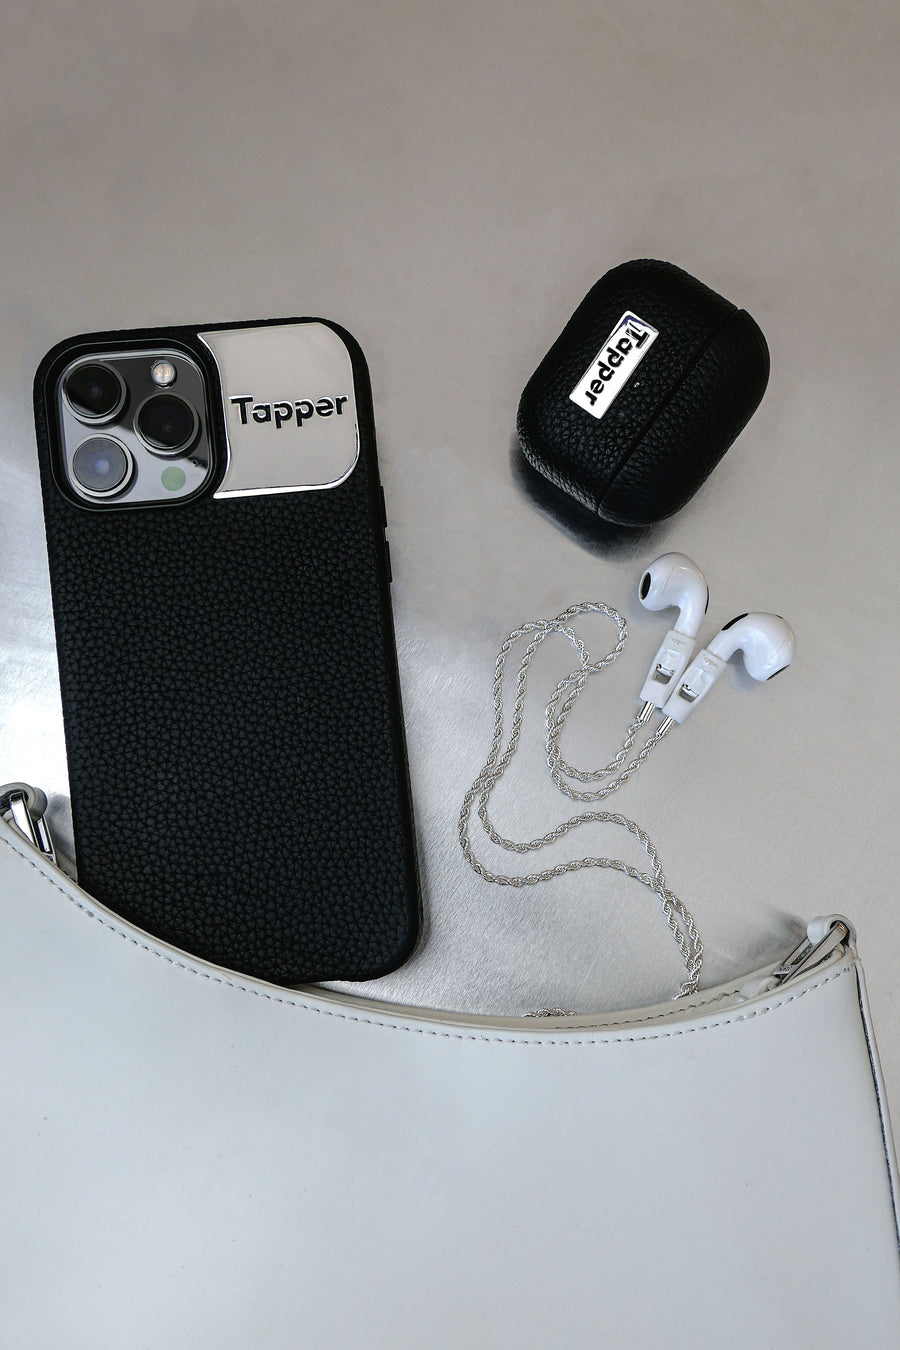 Tapper's luxurious black genuine cow leather AirPods case protects and elevates the look of your AirPods. The luxurious, protective case for AirPods with a metal logo plate colored in silver steps up your AirPods game. The next must-have high end protective Apple AirPods accessory in real leather and metal details. Compatible with AirPods (1st and 2nd generation). Designed in Sweden by Tapper. Free Express Shipping at gettapper.com